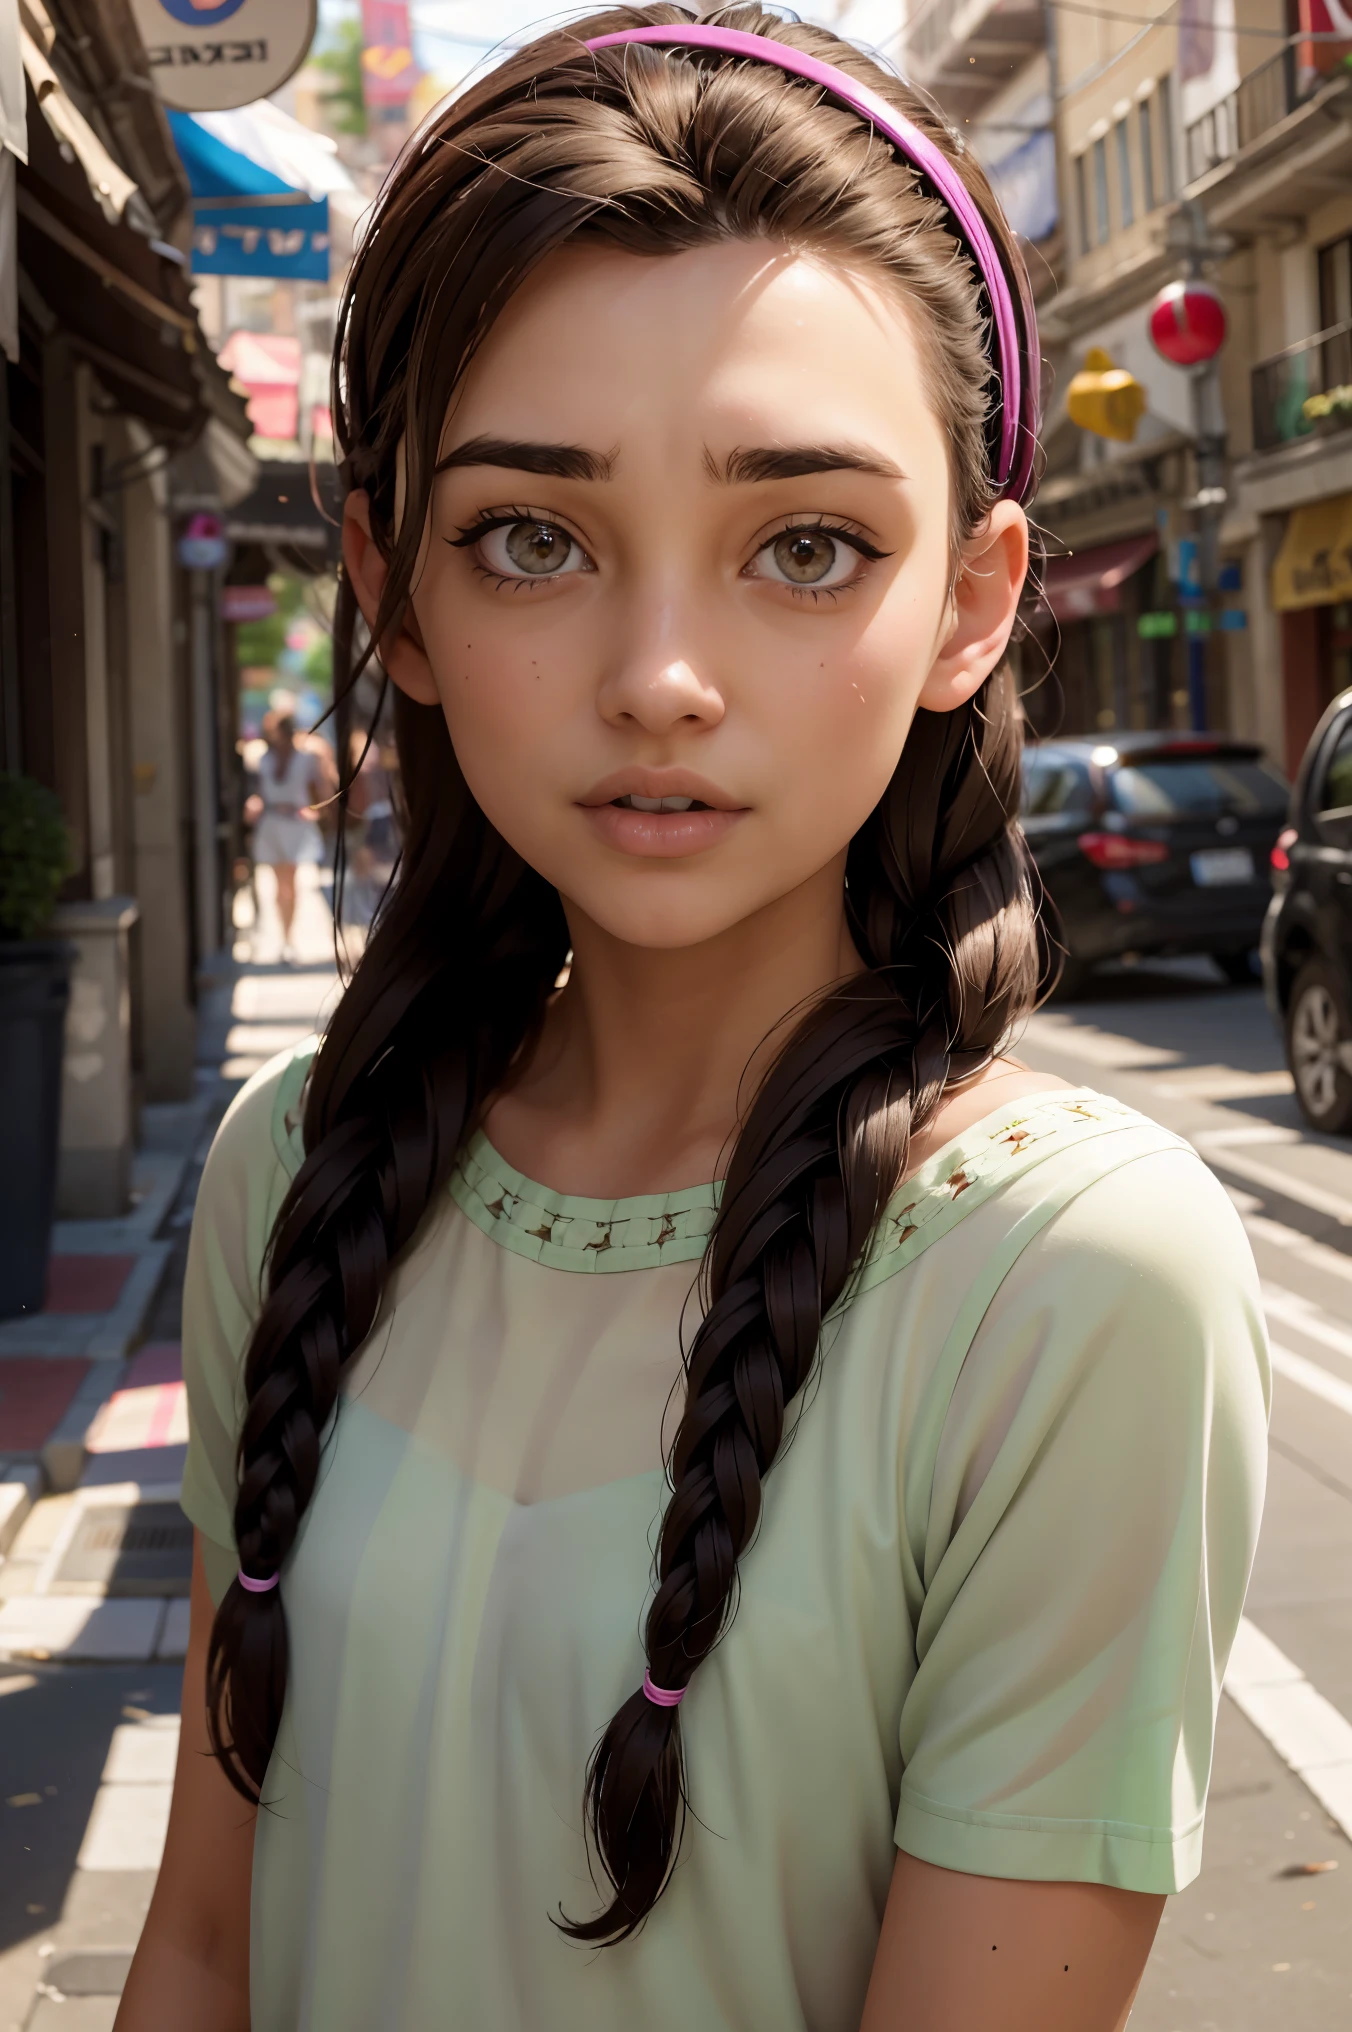 An impressive and intricate full color portrait, Ultra-HD a 13 year old girl, brown hair with 2 braids, brown eyes, pink headband, detailed face, dressed in a light green t-shirt with embroidery on the neck, no logos, epic character composition, alessio albi, nina masic, sharp focus, natural lighting, subsurface dispersion, f2, 35mm,,